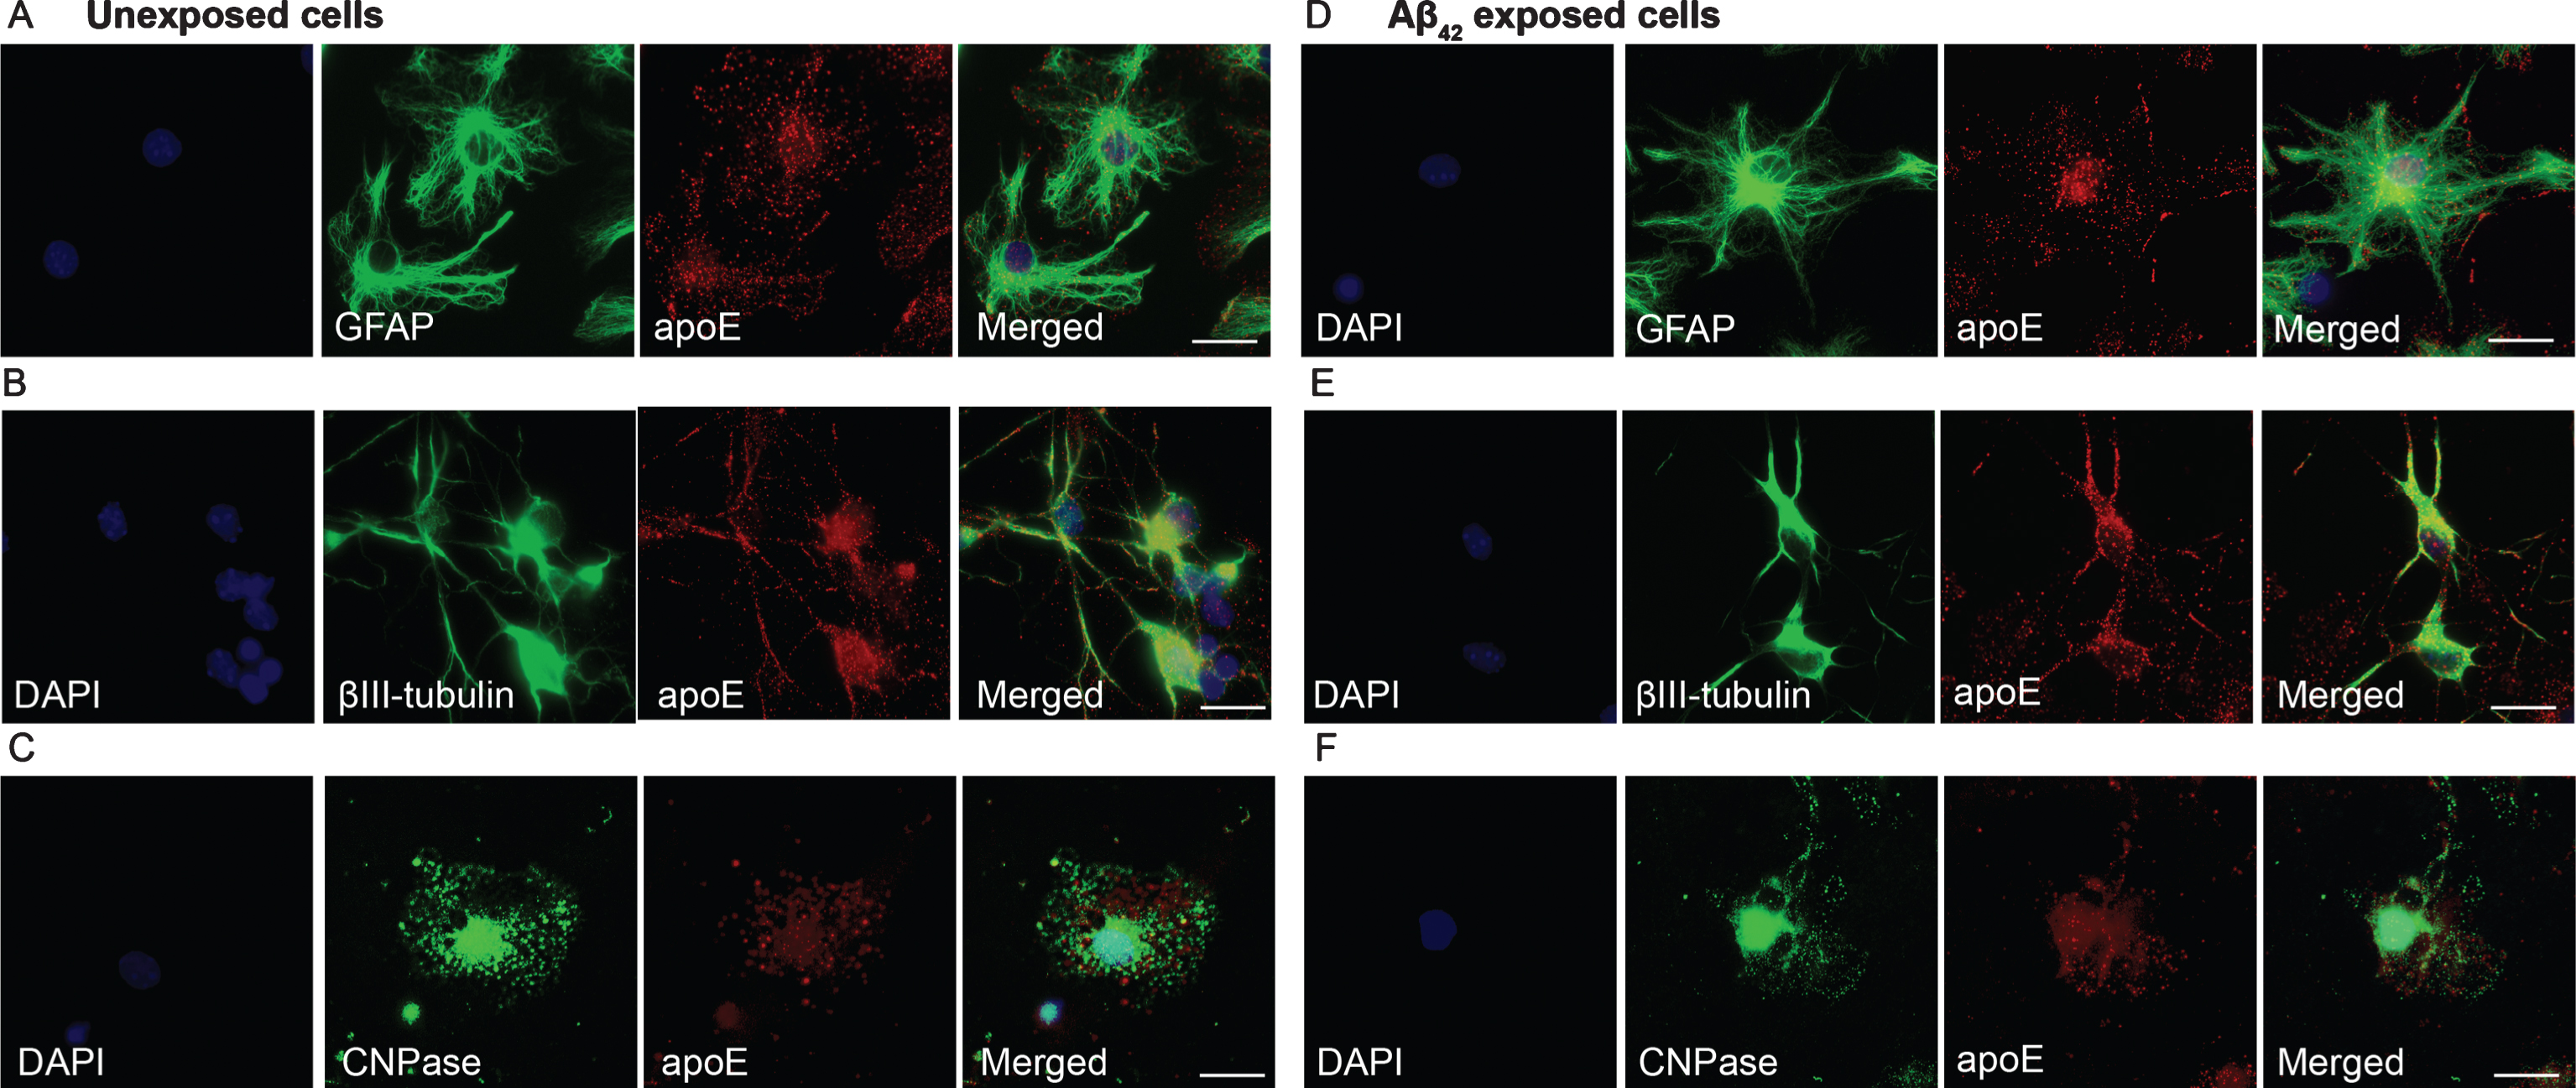 Immunostainings of apoE shows a similar intracellular expression pattern in Aβ42 protofibril exposed and unexposed cells. Astrocytes (A), neurons (B), and oligodendrocytes (C) from day 2 revealed that apoE was expressed in all three cell types, although to a greater extent in astrocytes and neurons than in oligodendrocytes. Following Aβ42 protofibril exposure, astrocytes displayed a high apoE expression around the nucleus, but a vesicular, dotted expression pattern was also found close to the plasma membrane, indicating a possible apoE secretion (D). Neurons showed a widespread expression of apoE throughout the cell soma and the dendrites (E). Some apoE expression was also observed in the few oligodendrocytes that were present in the culture (F), however in comparison to astrocytes and neurons, the expression was very low. DAPI (blue), GFAP, βIII-tubulin, CNPase (all green), and apoE (red). Scale bars: A-F = 20μm.